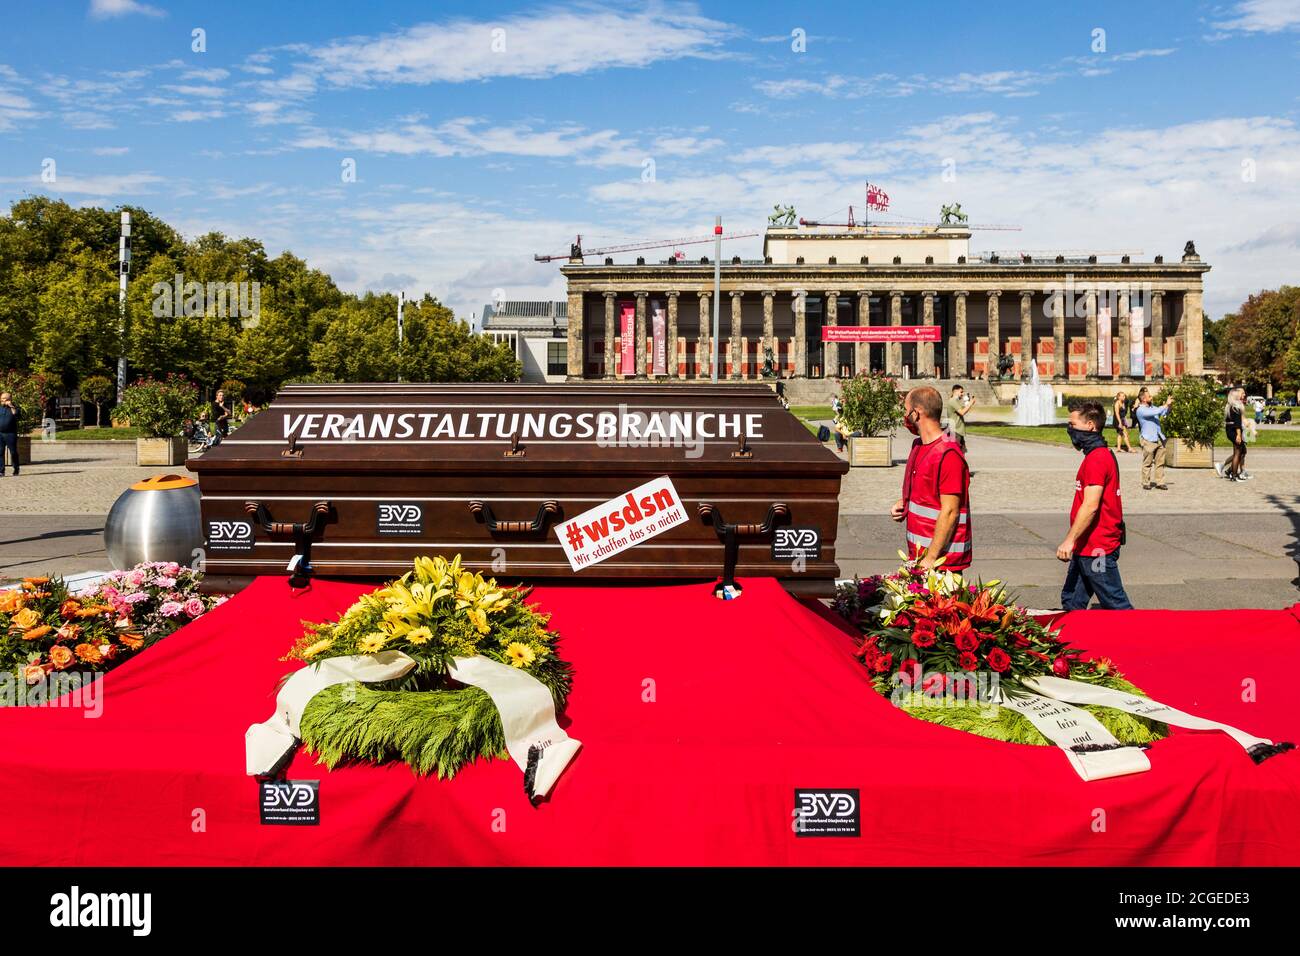 Berlin, Germany. 9 September 2020. Red Alert Protest of people affected by the closure of cultural organisations and events due to the Coronavirus crisis. Stock Photo